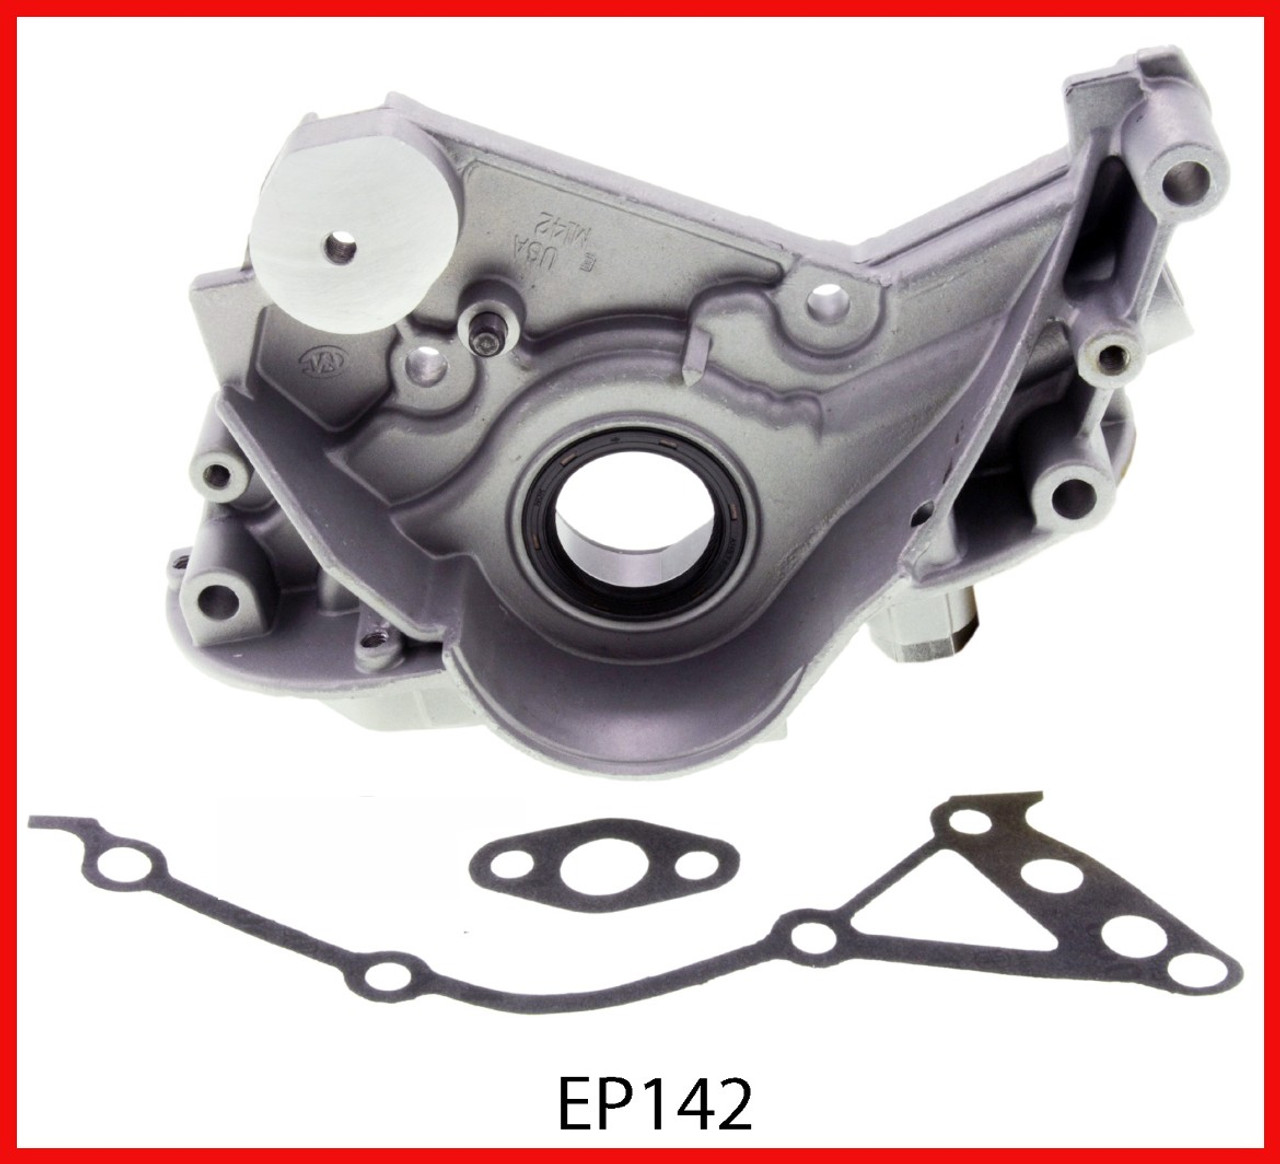 Oil Pump - 1995 Plymouth Voyager 3.0L (EP142.H75)